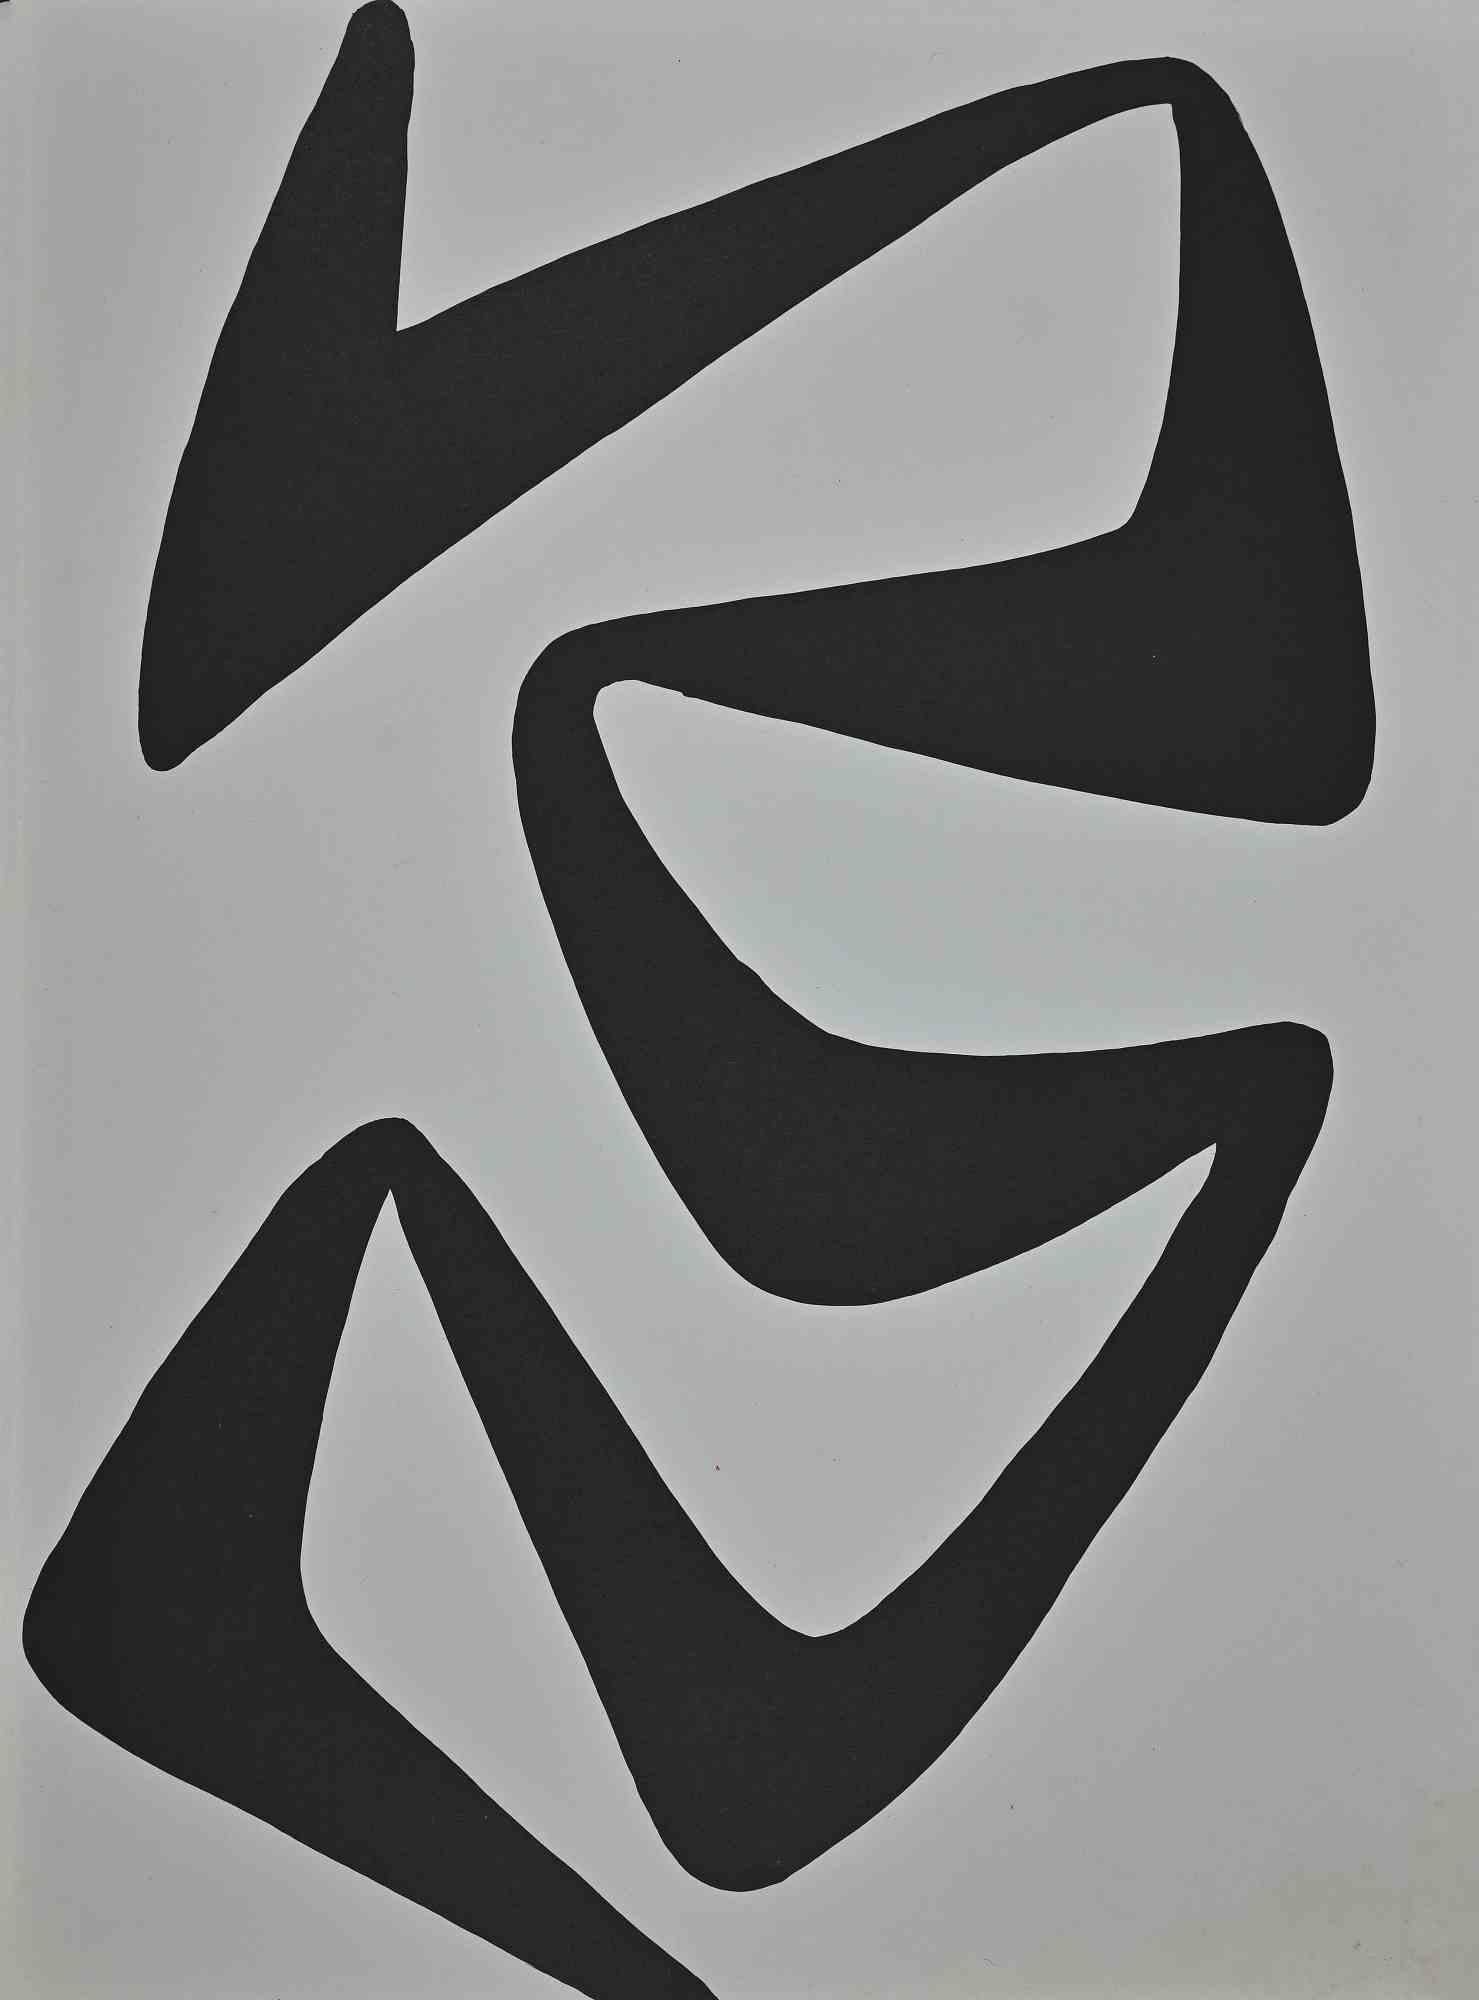 Black Abstract Composition is an original artwork realized by Alexander Calder for the French art magazine "Derrière Le Miroir" no. 173, 1968.

Original black and white lithograph. 

The artwork was realized for the art review "Derriere Le Miroir".